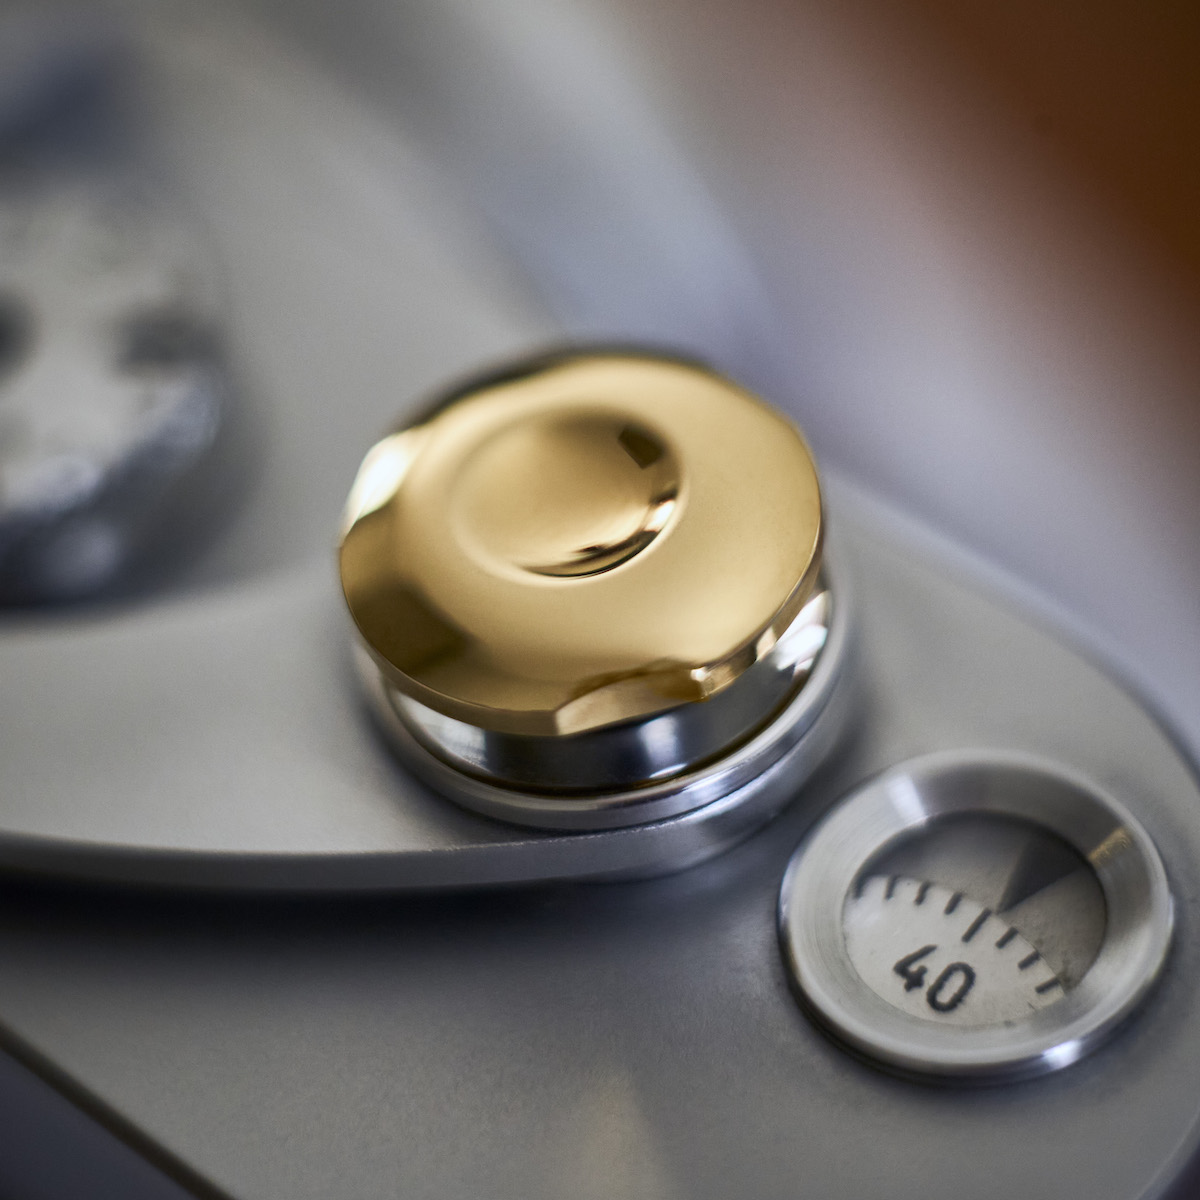 New Komaru polished brass limited edition soft-release button released -  Leica Rumors